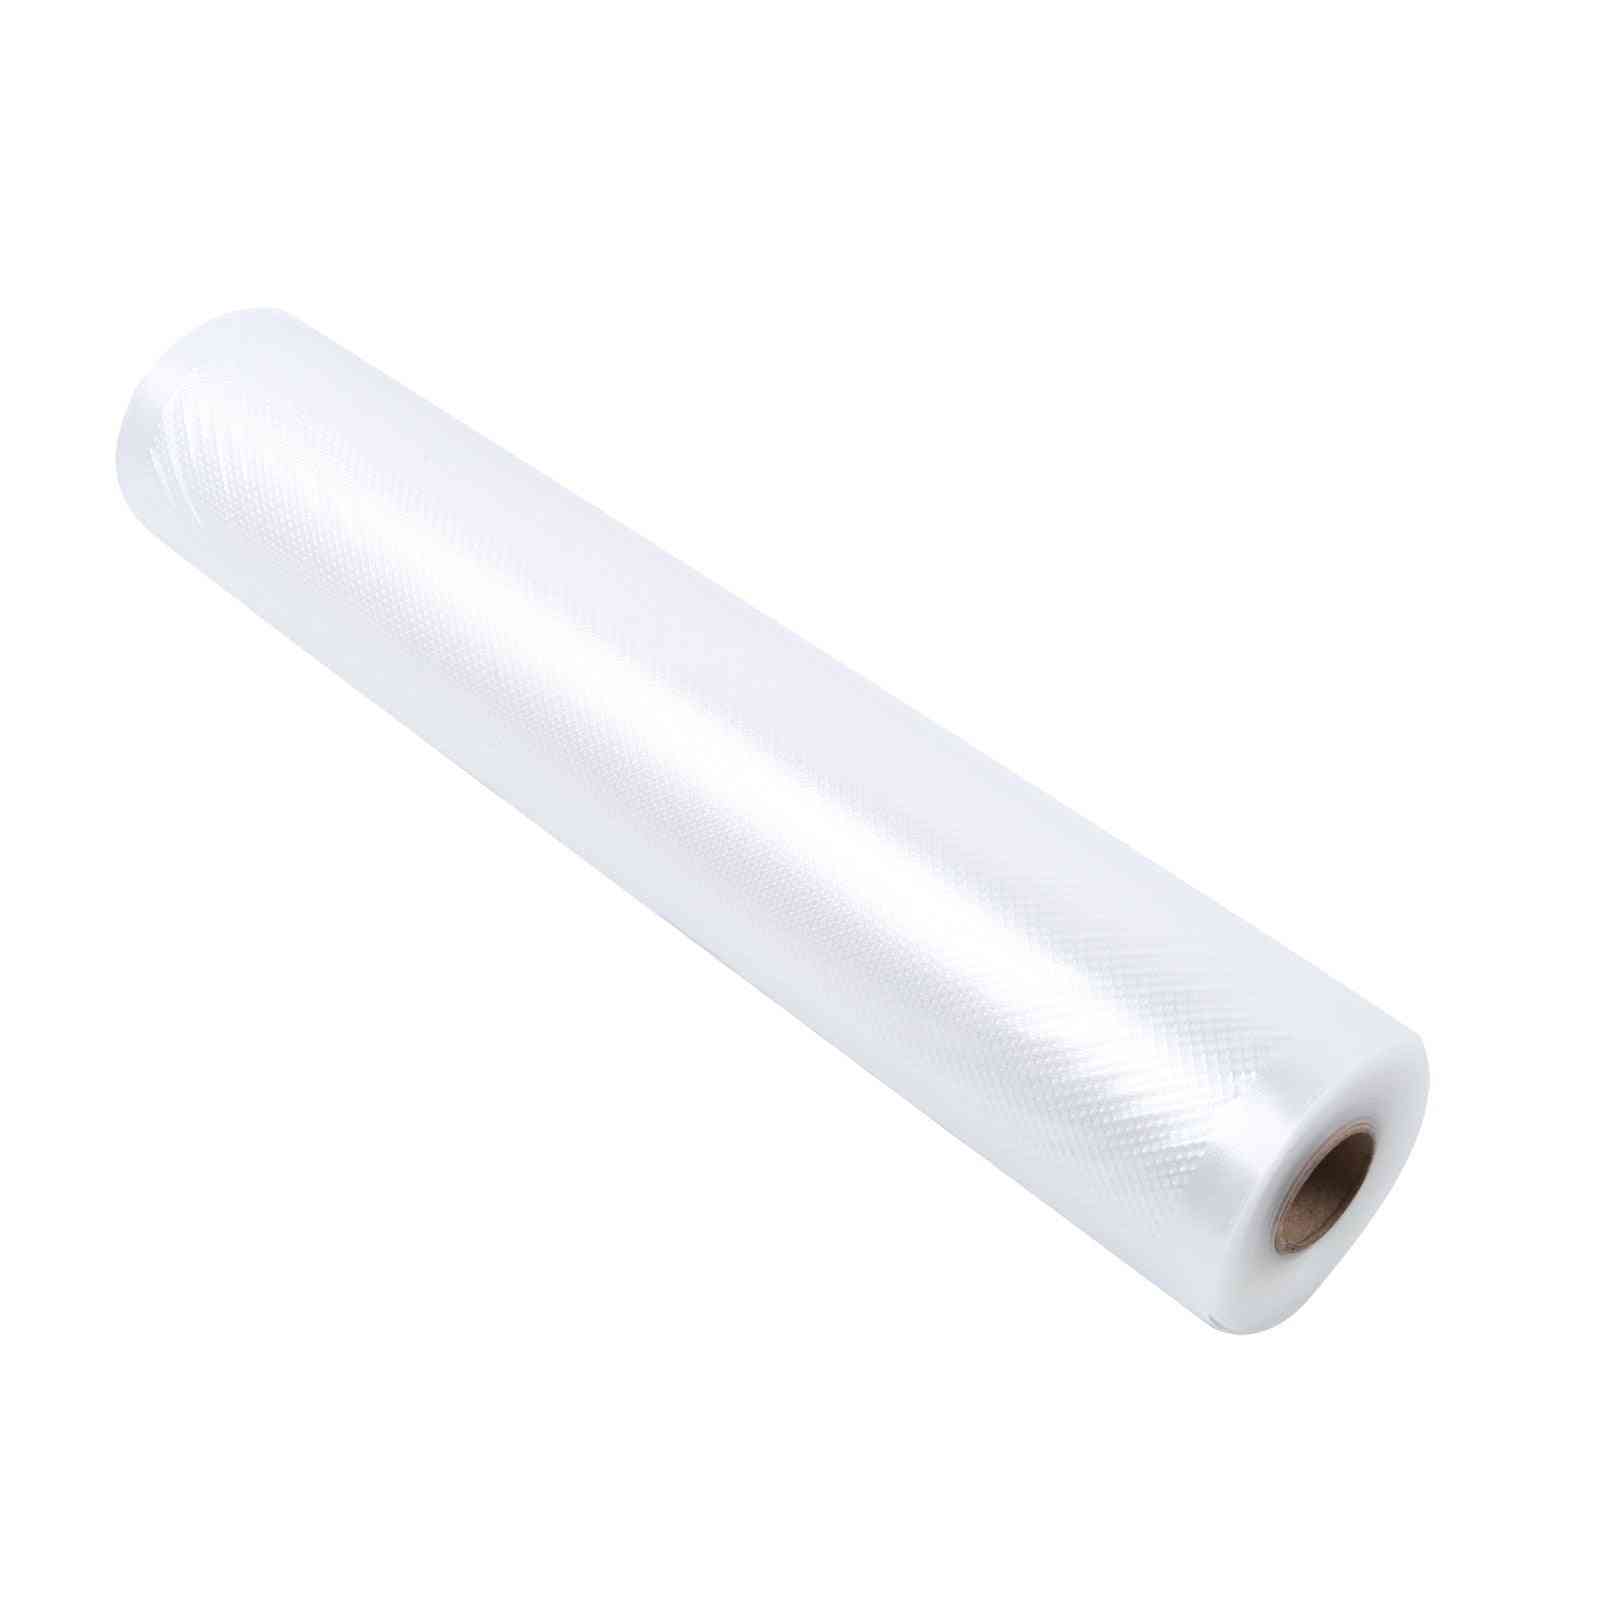 Vacuum Compression Film For Packaging Food